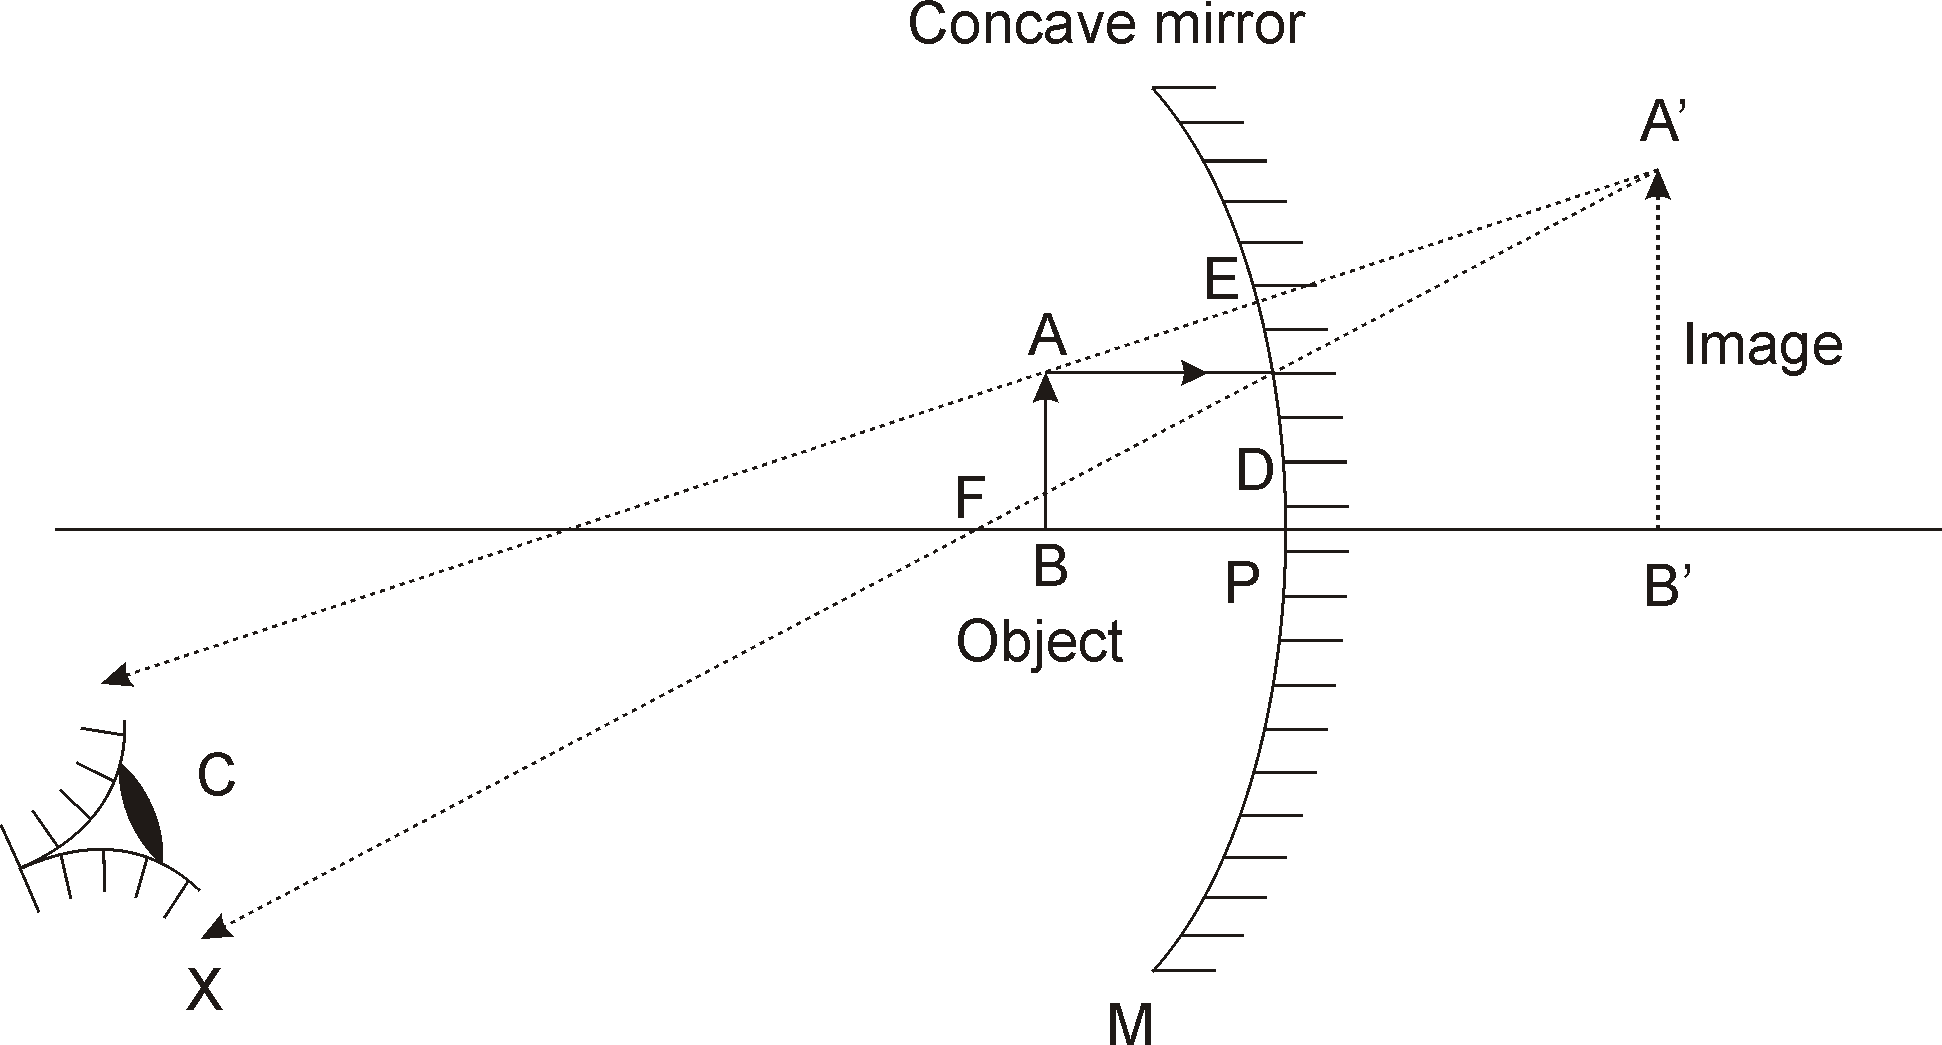 Light Tutormate, How Image Is Formed In Concave Mirror